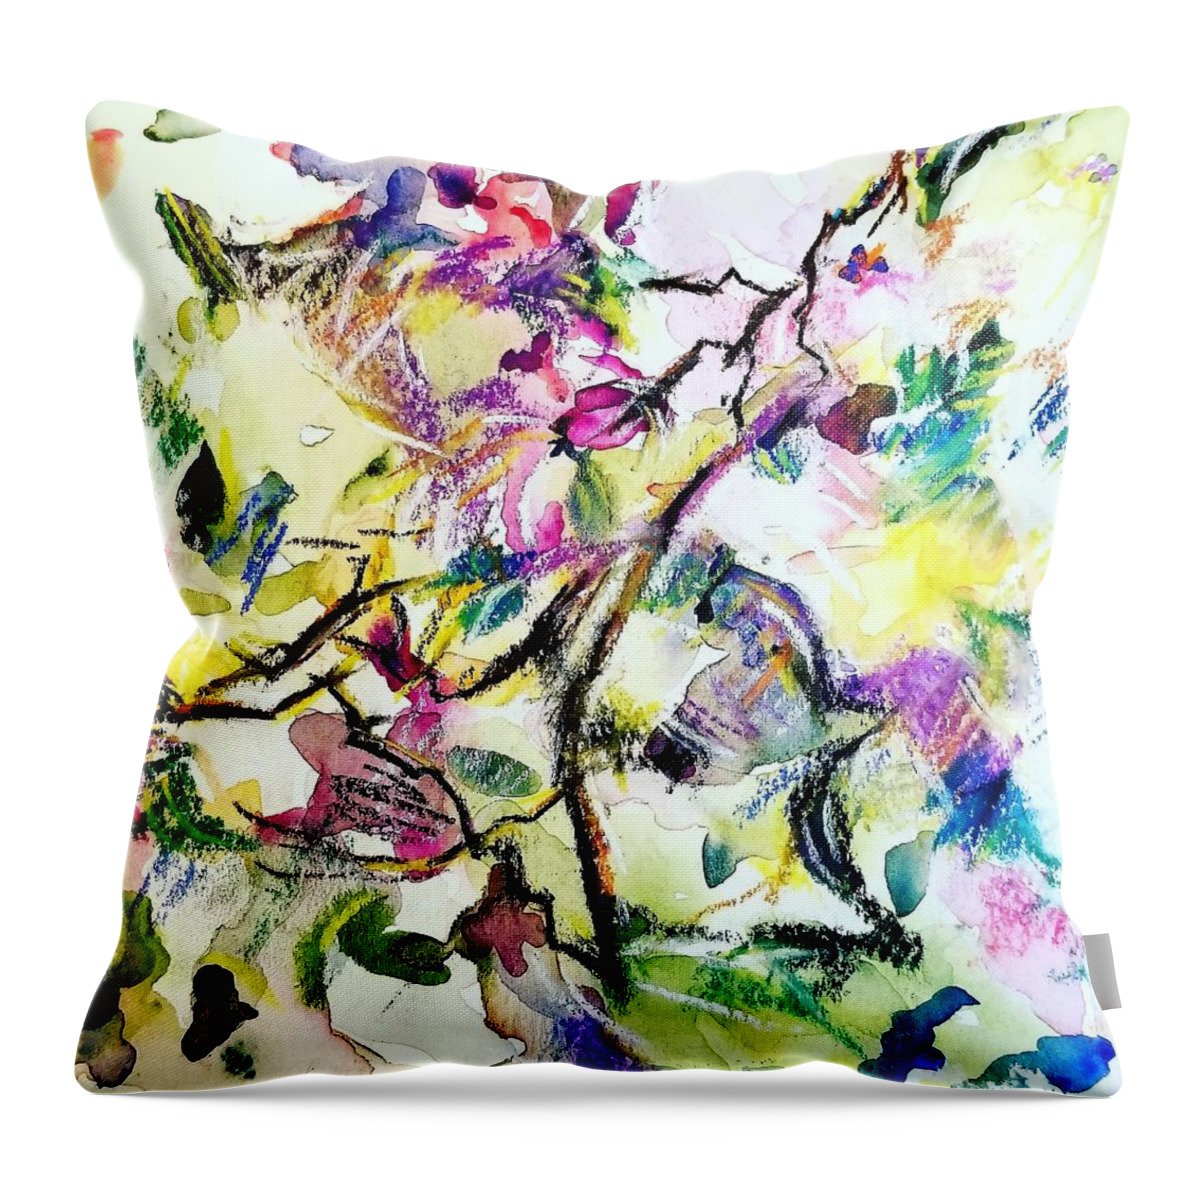 Florals Throw Pillow featuring the mixed media New Orleans Spring Garden by Julie TuckerDemps